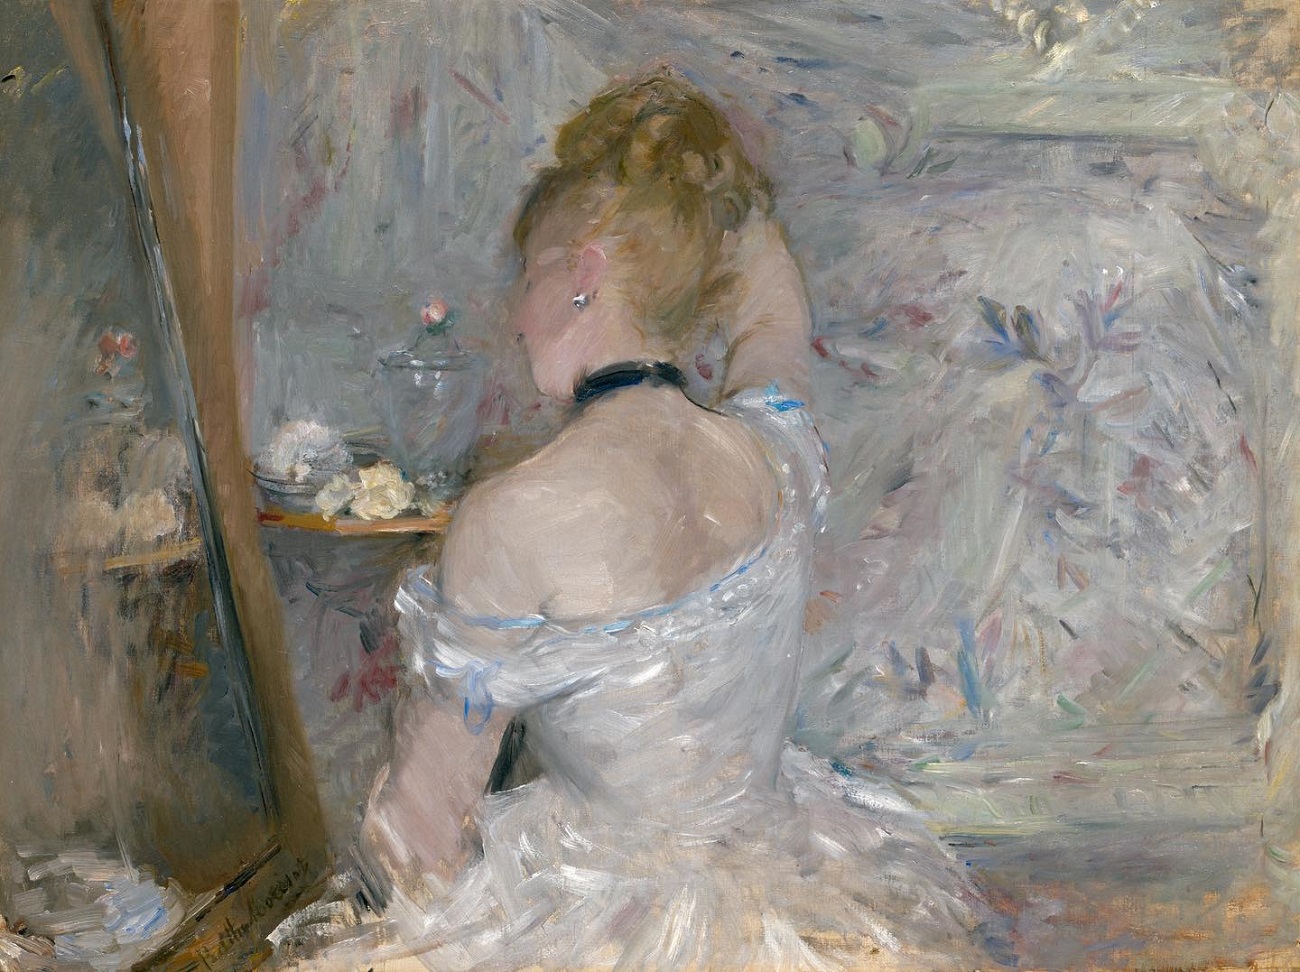 berthe morisot, woman at her toilette, 1875 80. image courtesy of the art institute of chicago